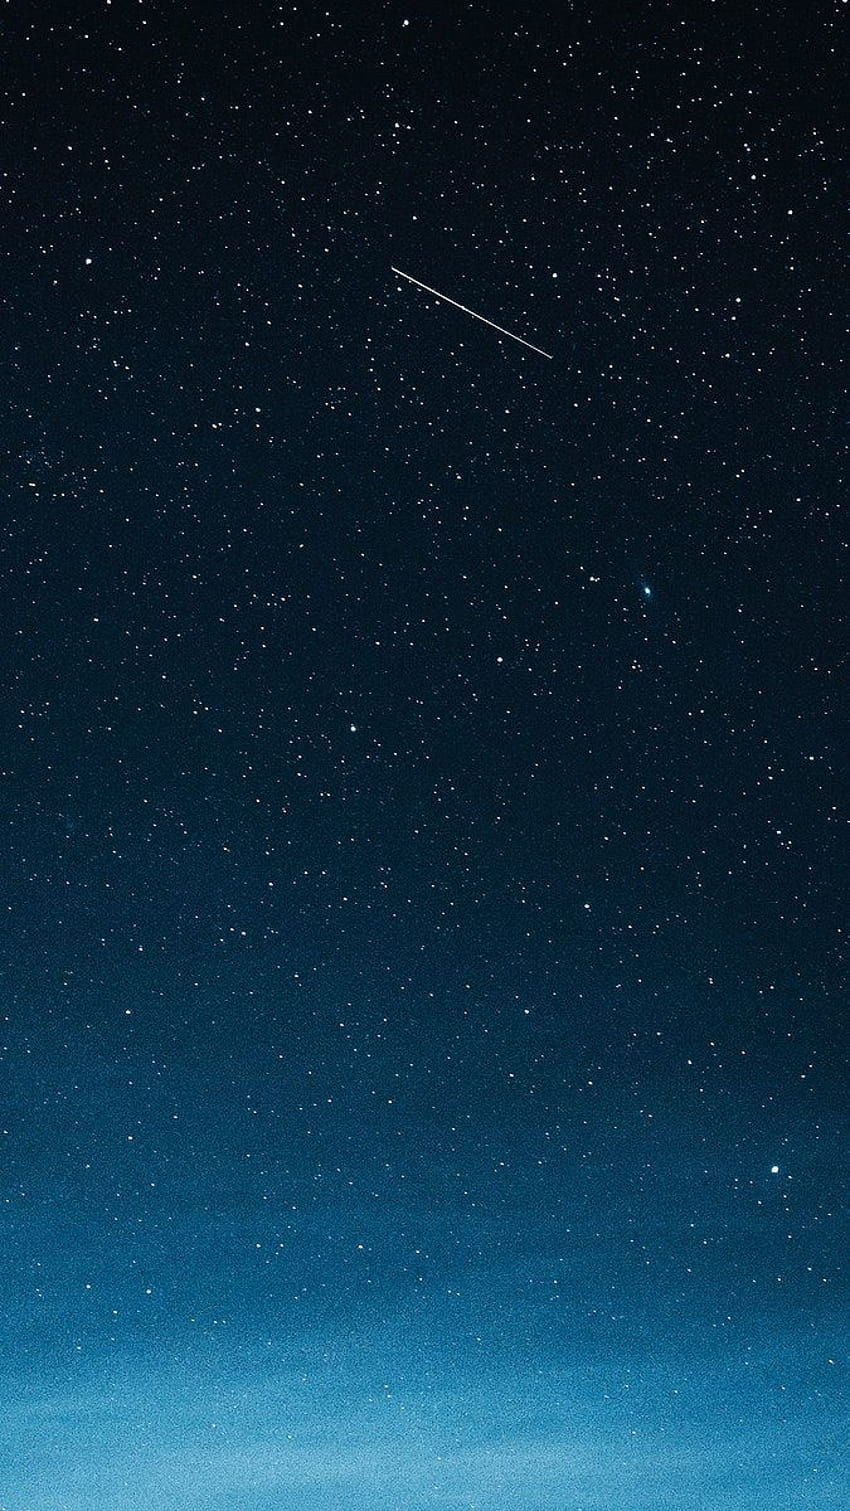 Shooting star in the dark blue sky over Greenland, shooting star over planet HD phone wallpaper